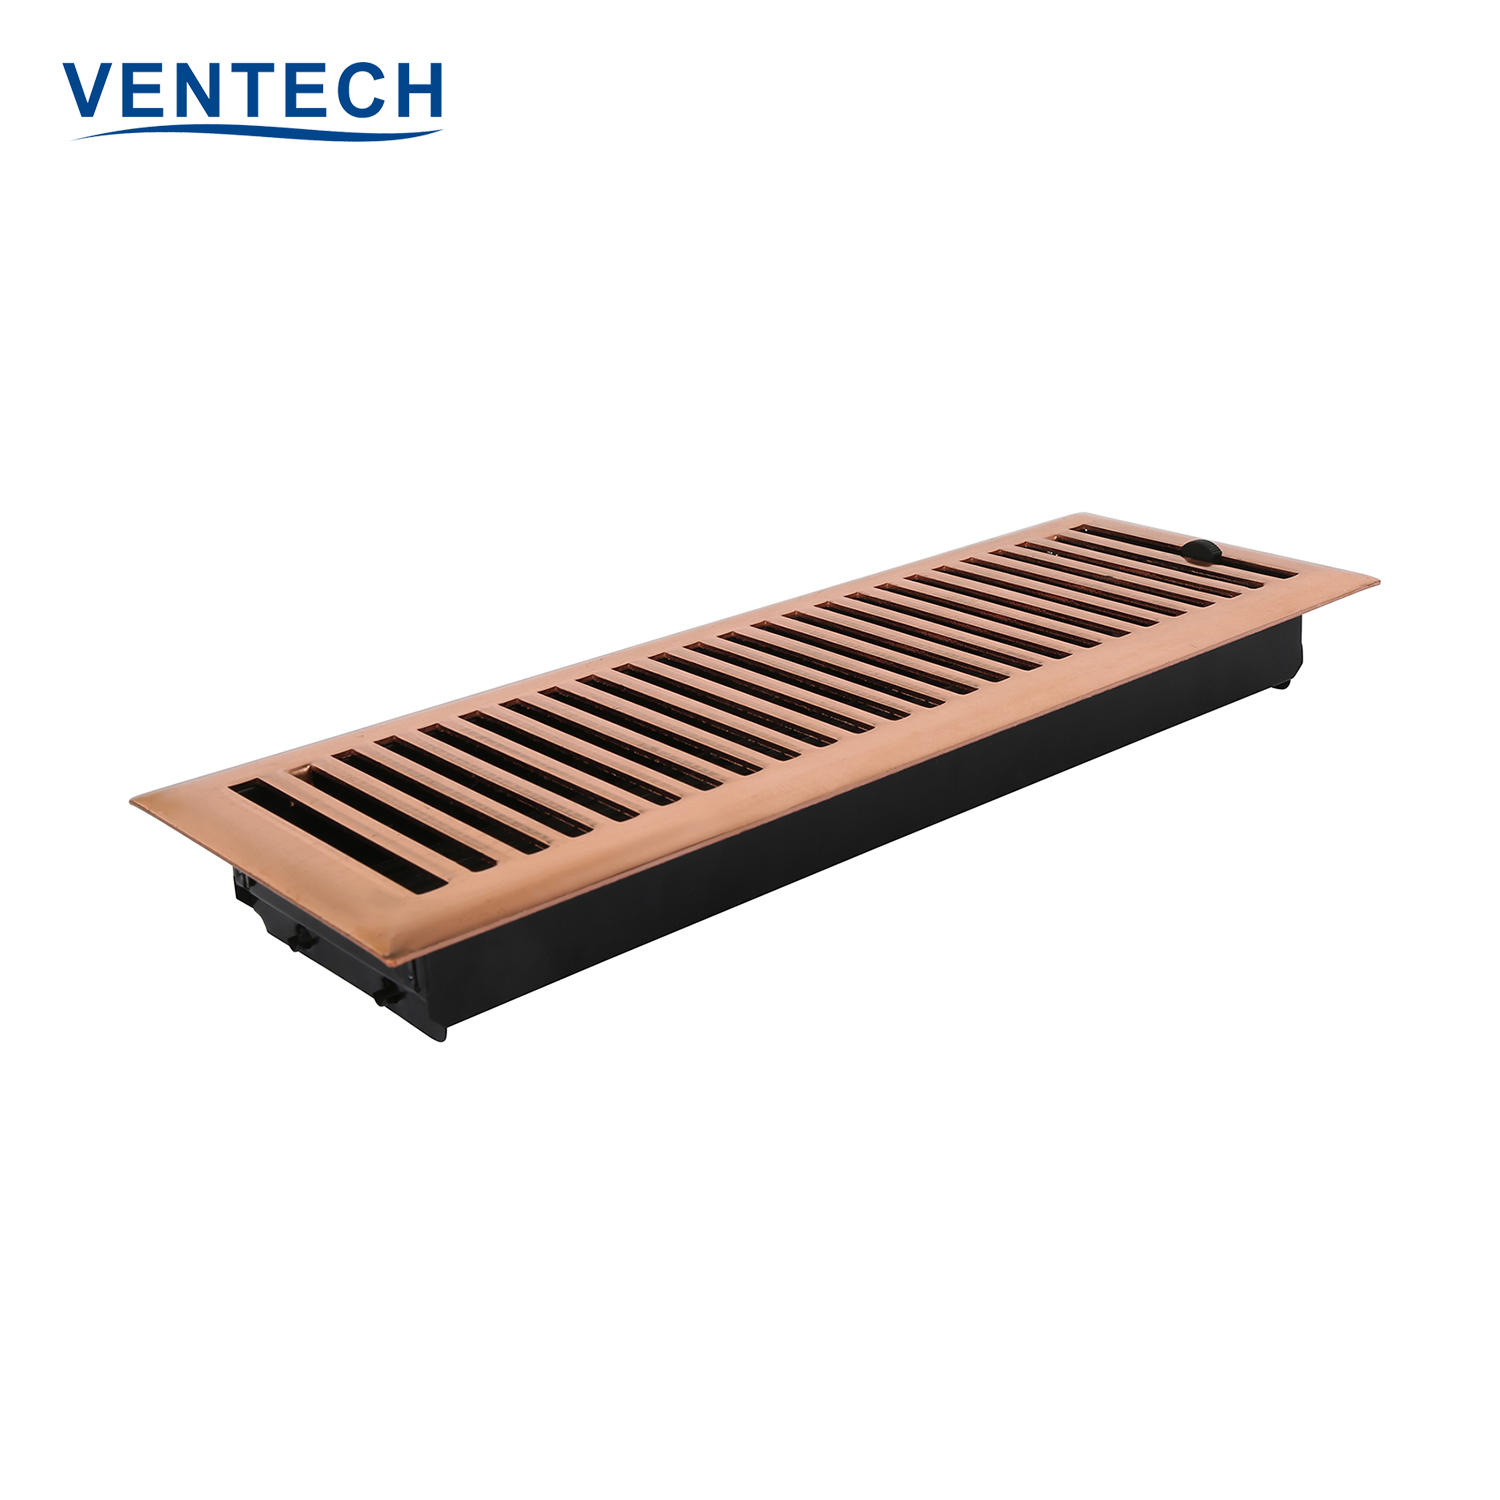 HVAC Air Vent Covers Air Conditioning Floor Grilles